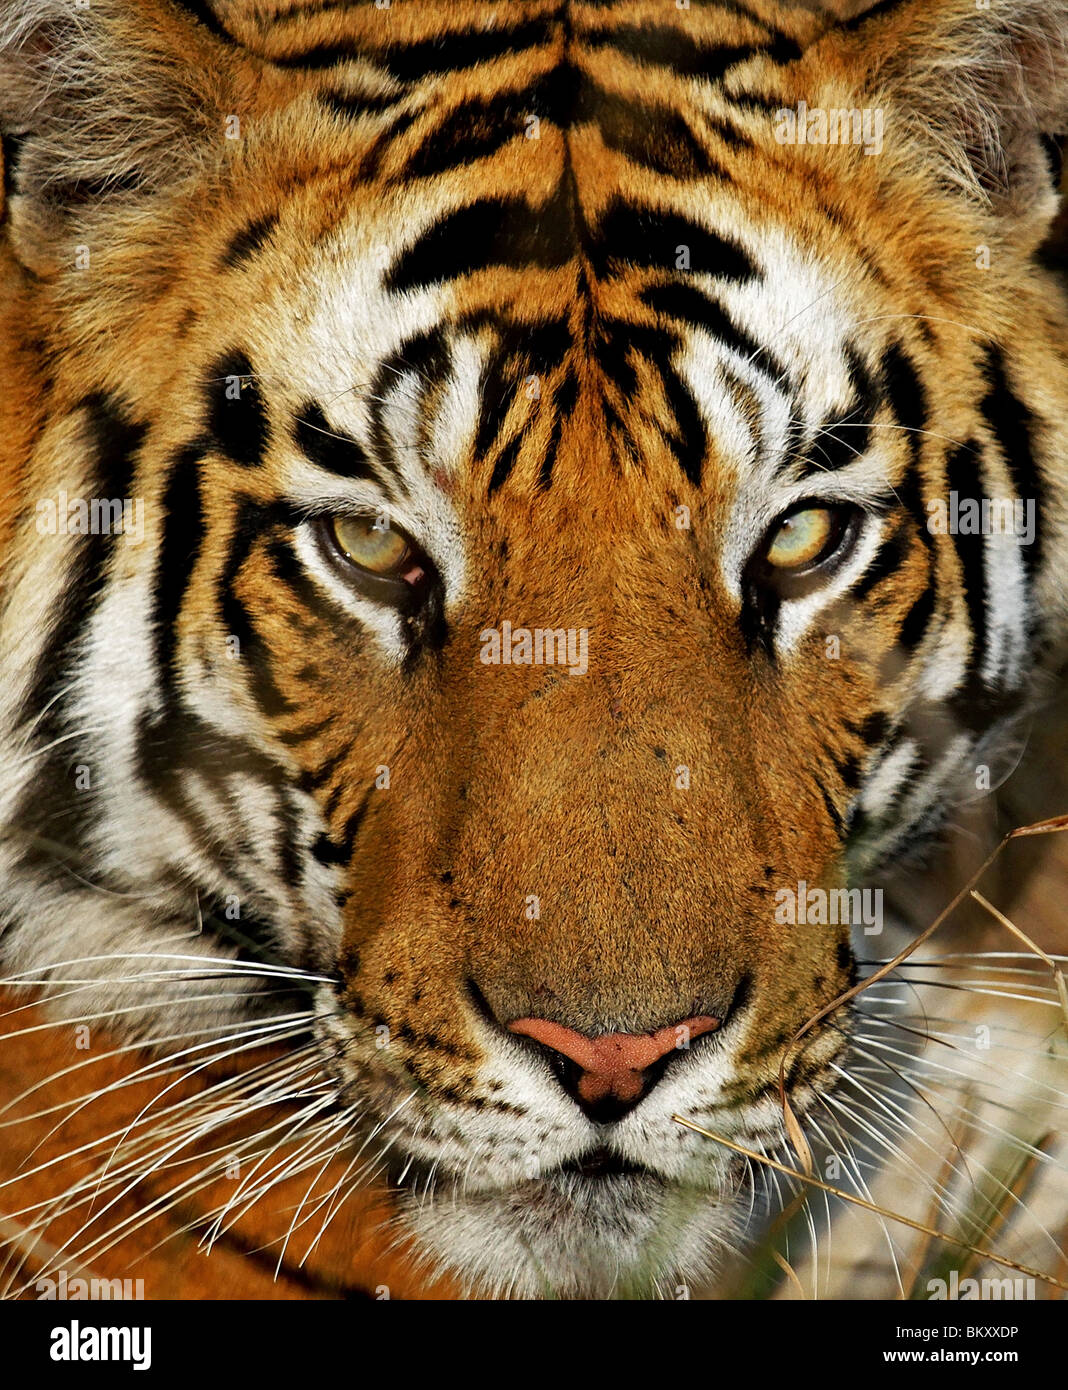 Portrait shot of a Young Male Tiger taken in Bandhavgarh National Park, India Stock Photo